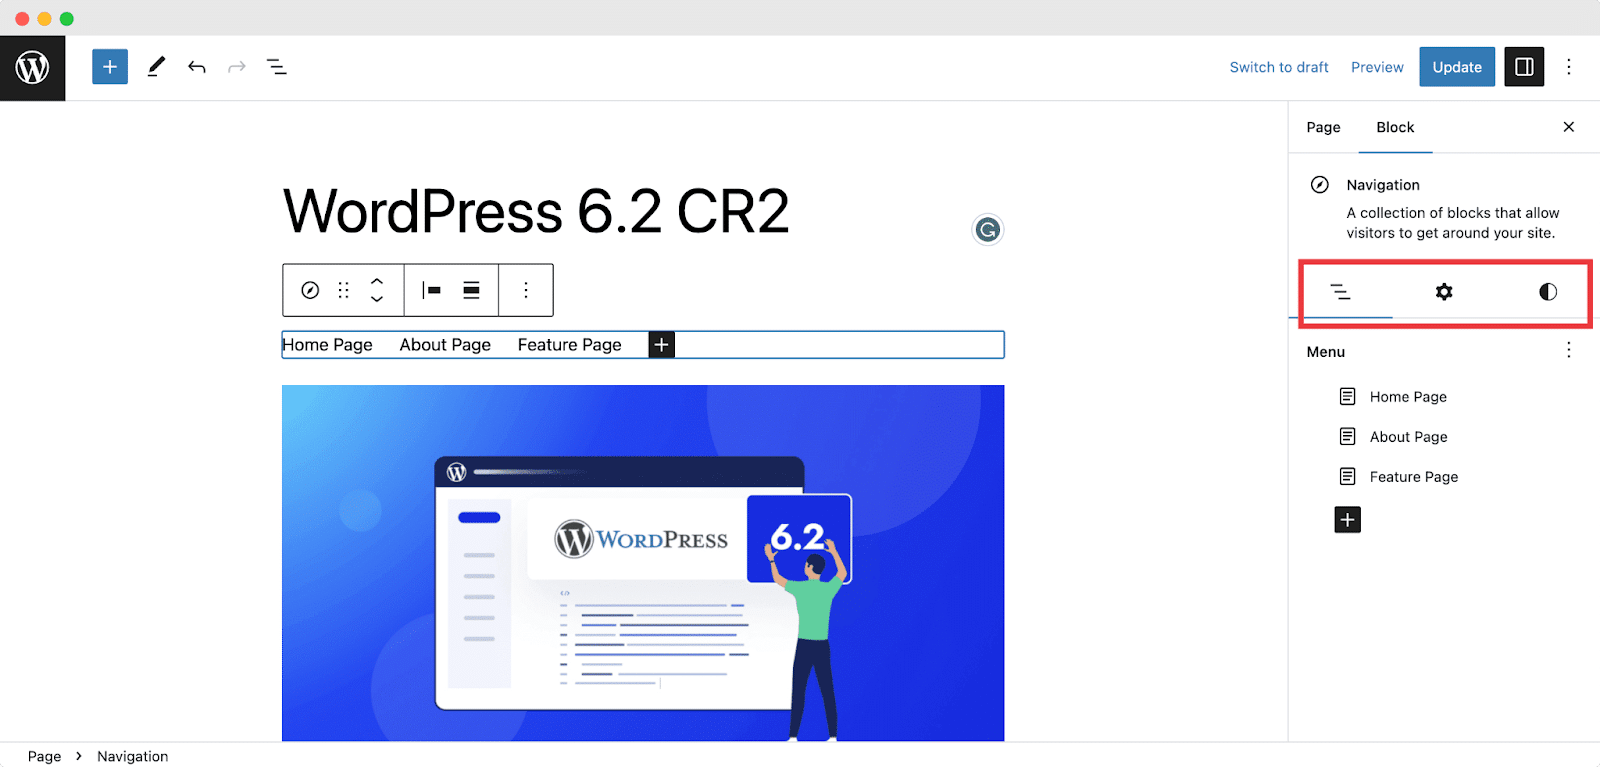 What's New In WordPress 6.2: Improved Site Editor, Openverse Integration, And More! [Screenshots Included] 1